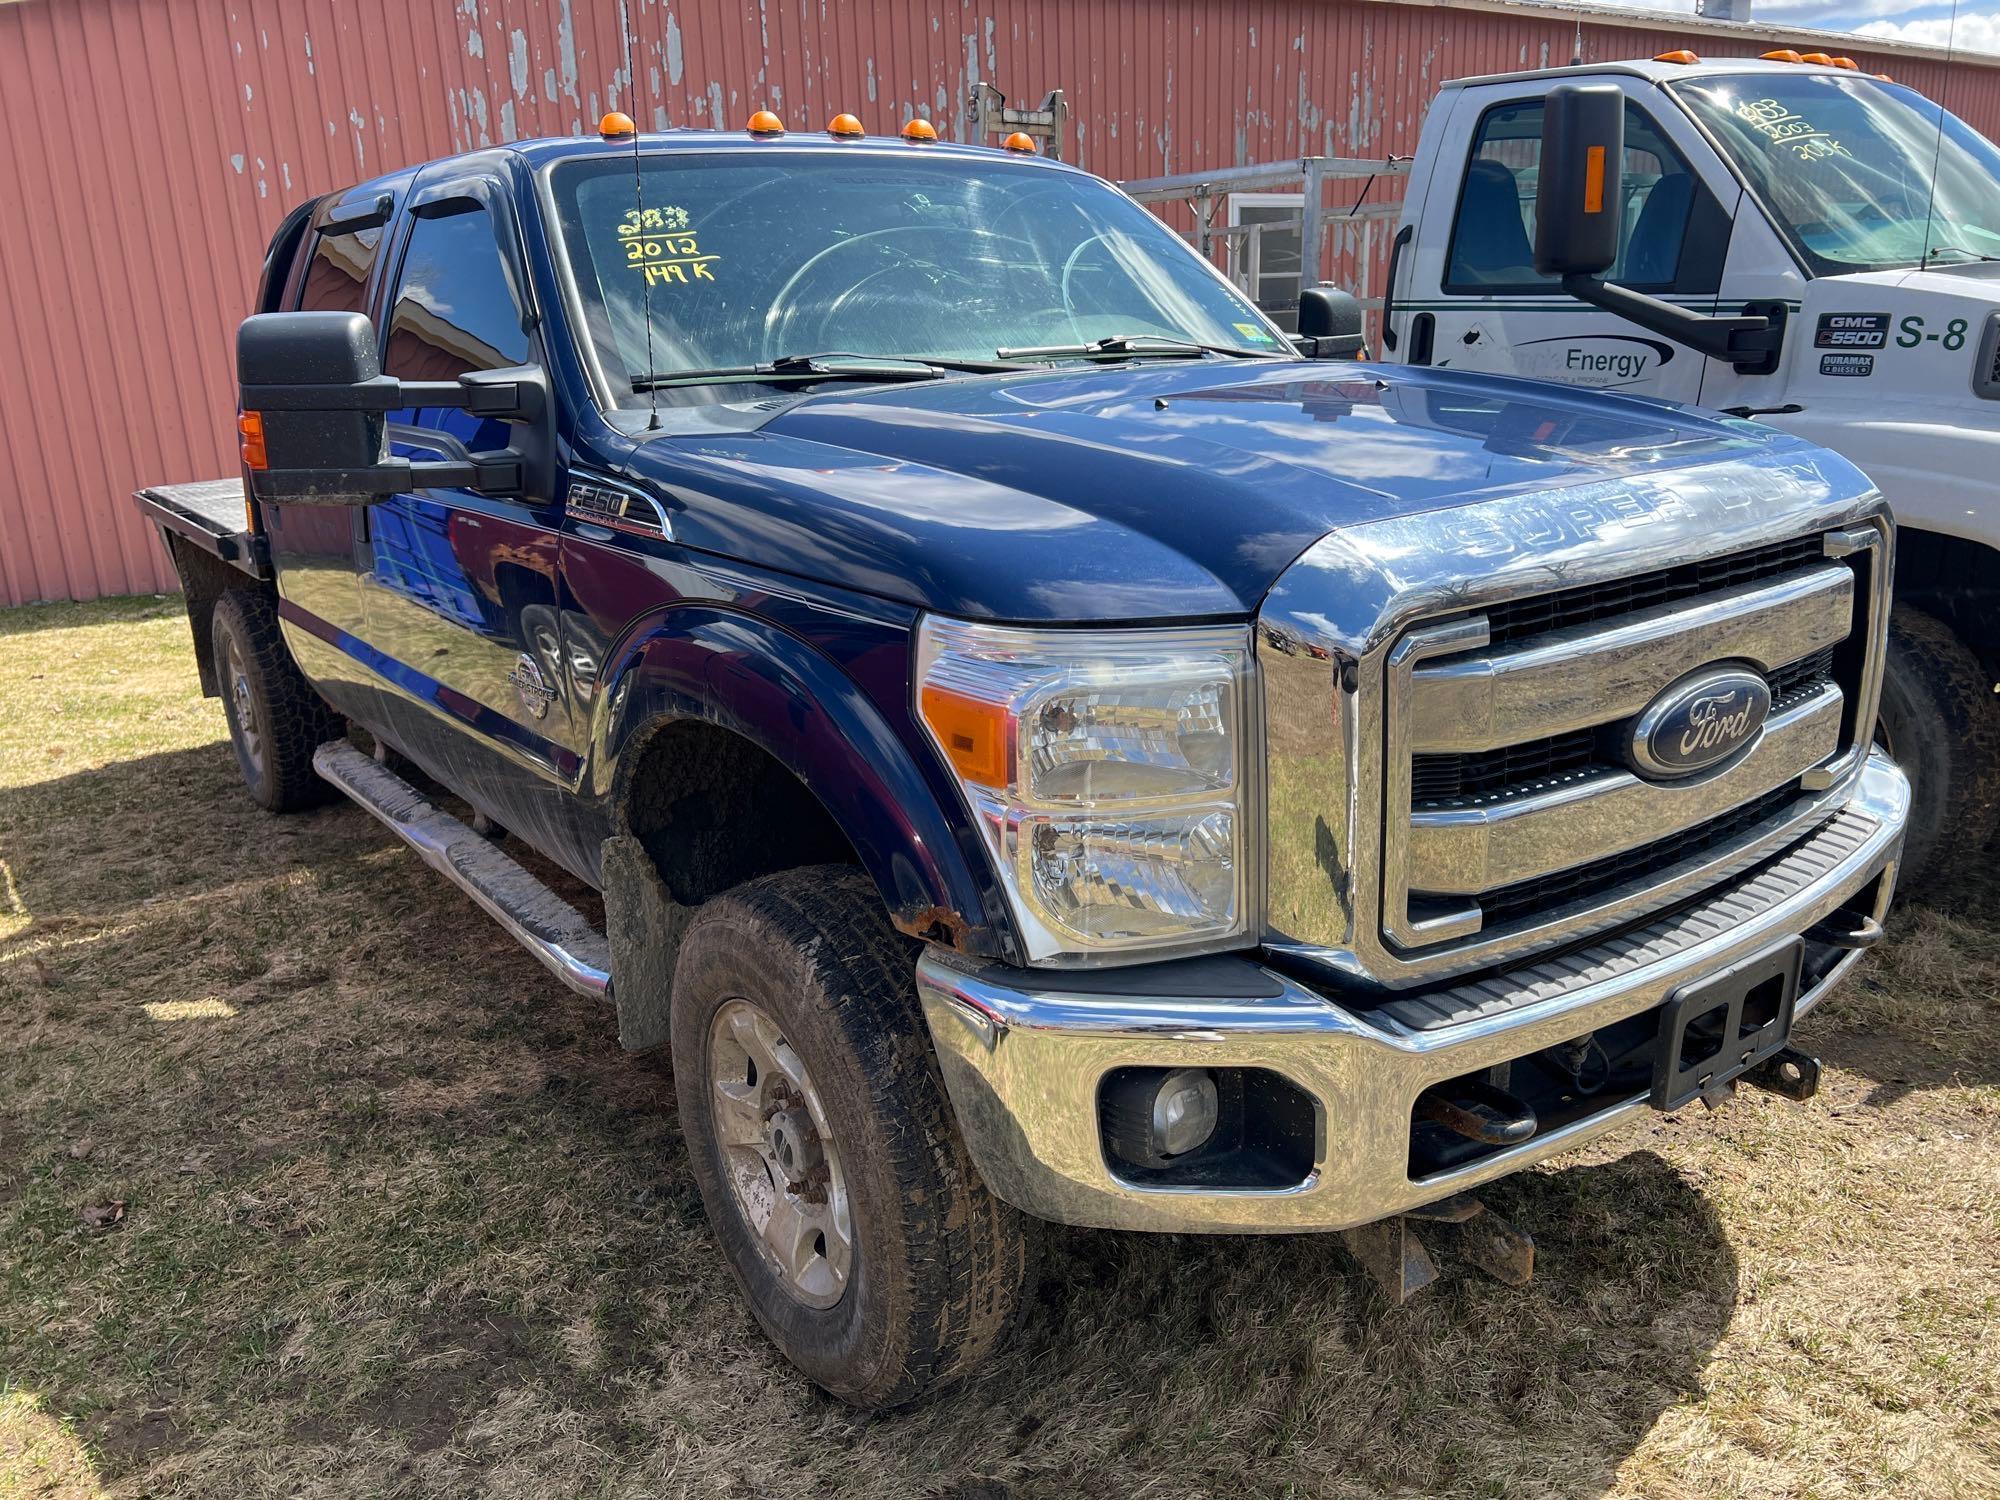 2012 FORD F250 SUPER DUTY XLT FLATBED TRUCK VN:D11458 powered by 6.7 diesel engine, equipped with